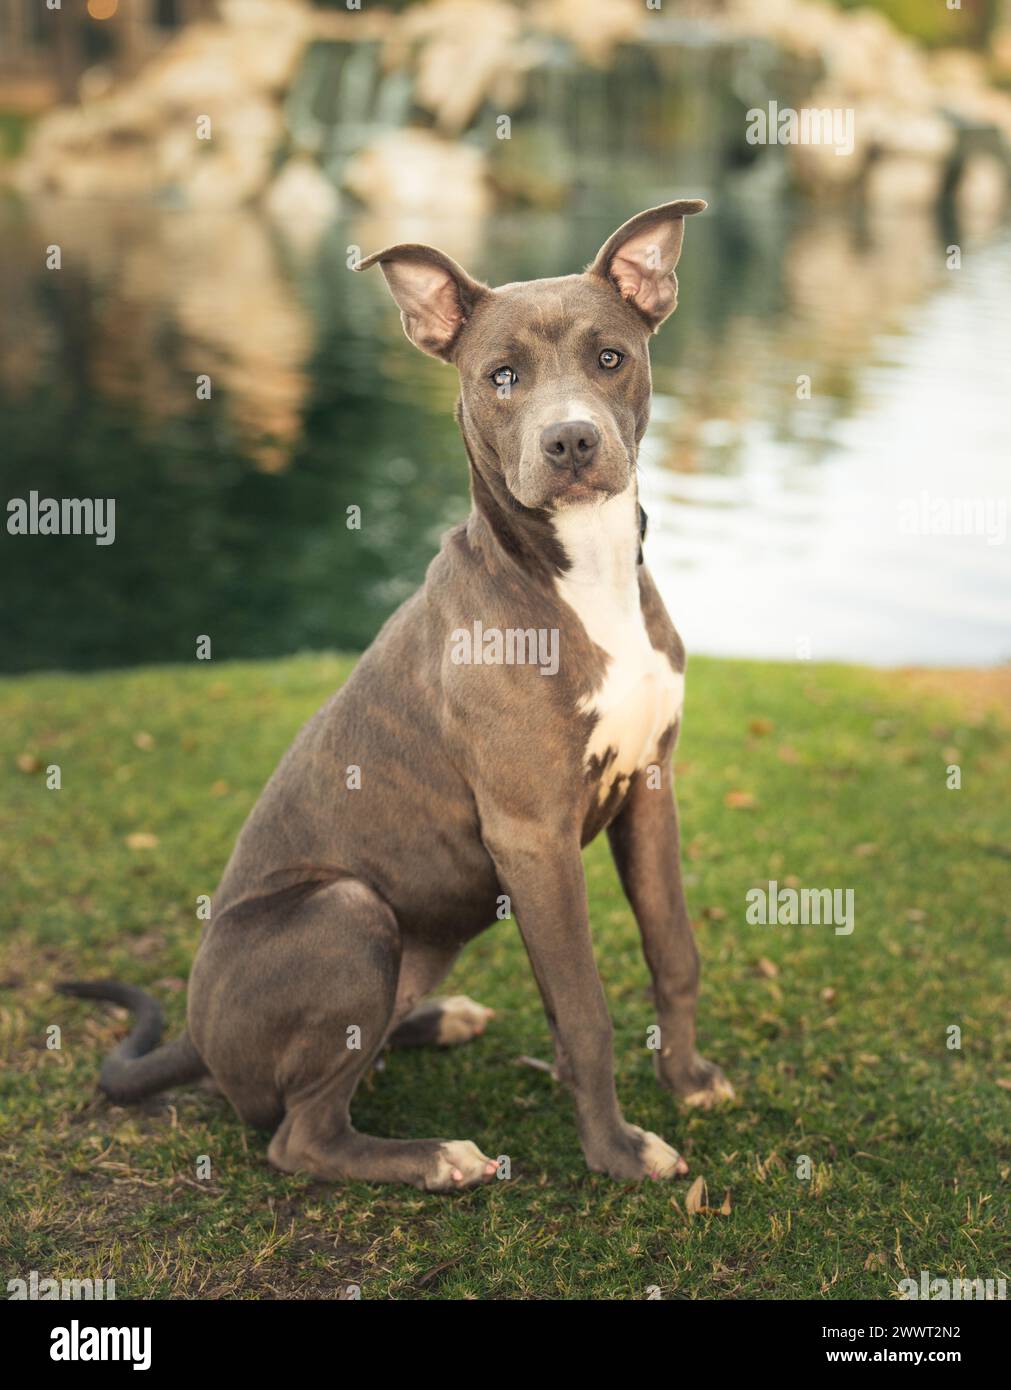 Grey pitbull puppy posiong for a portrait on the grass by a pond Stock Photo